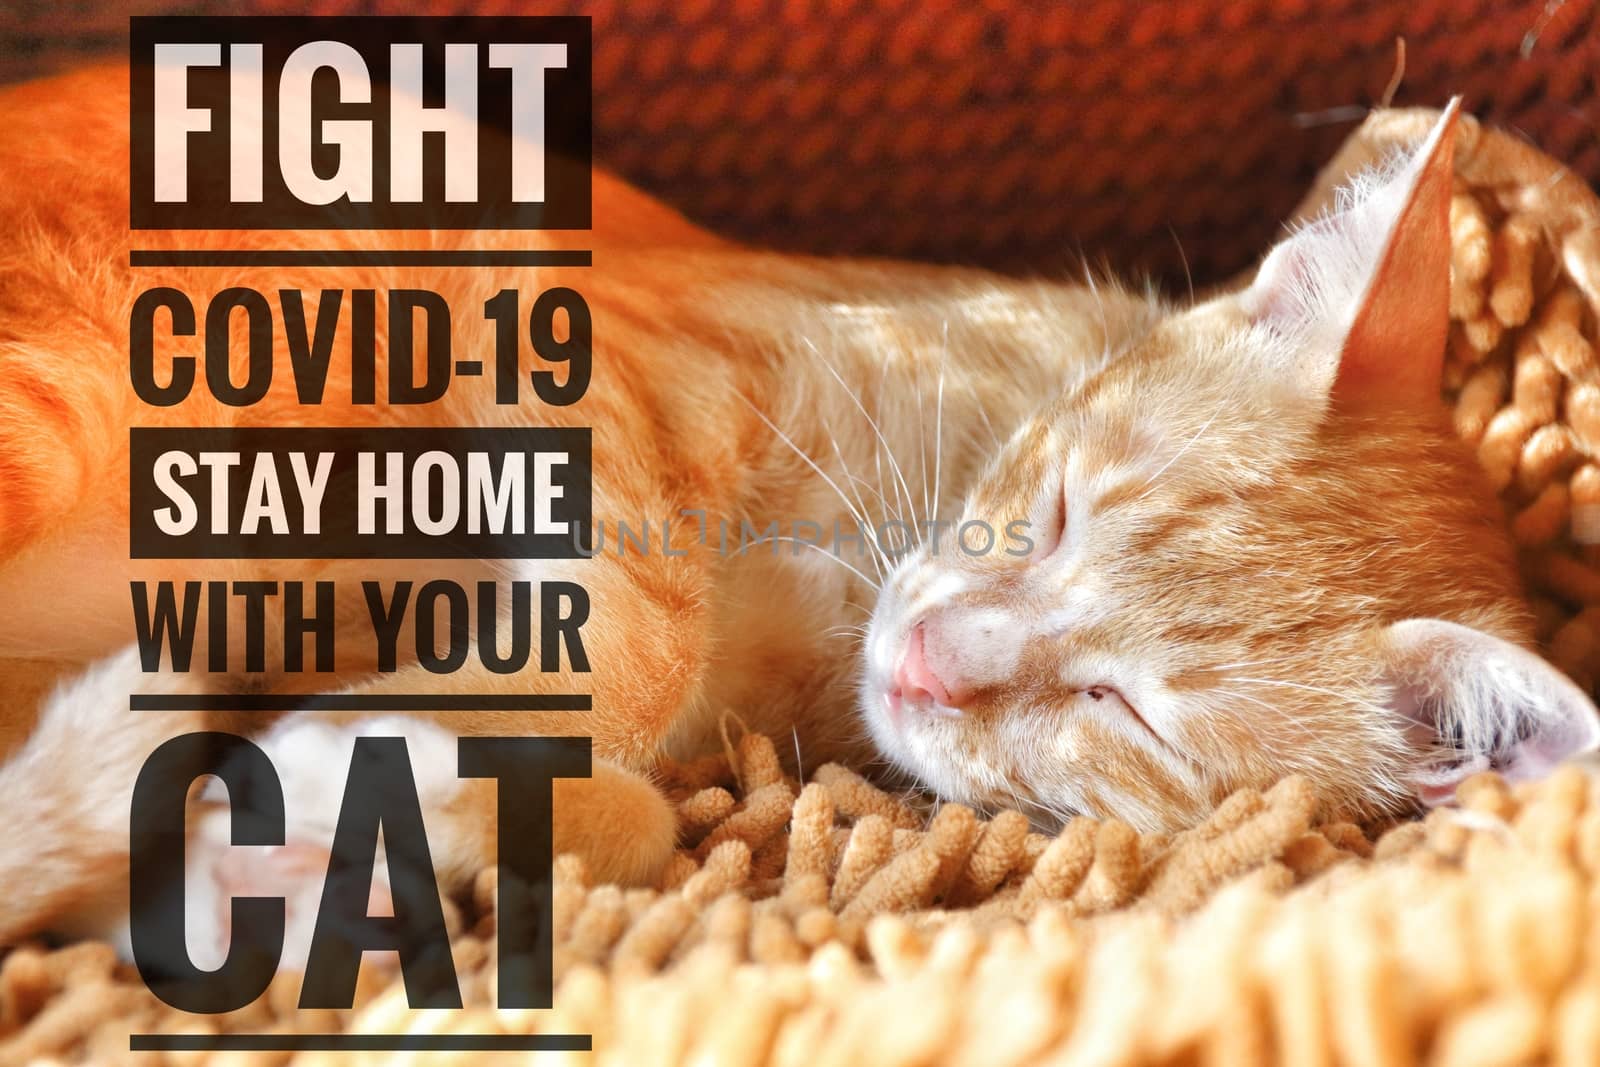 Cute feline and message to stay home with your cat and stay safe from the covid-19 outbreak by Sonnet15